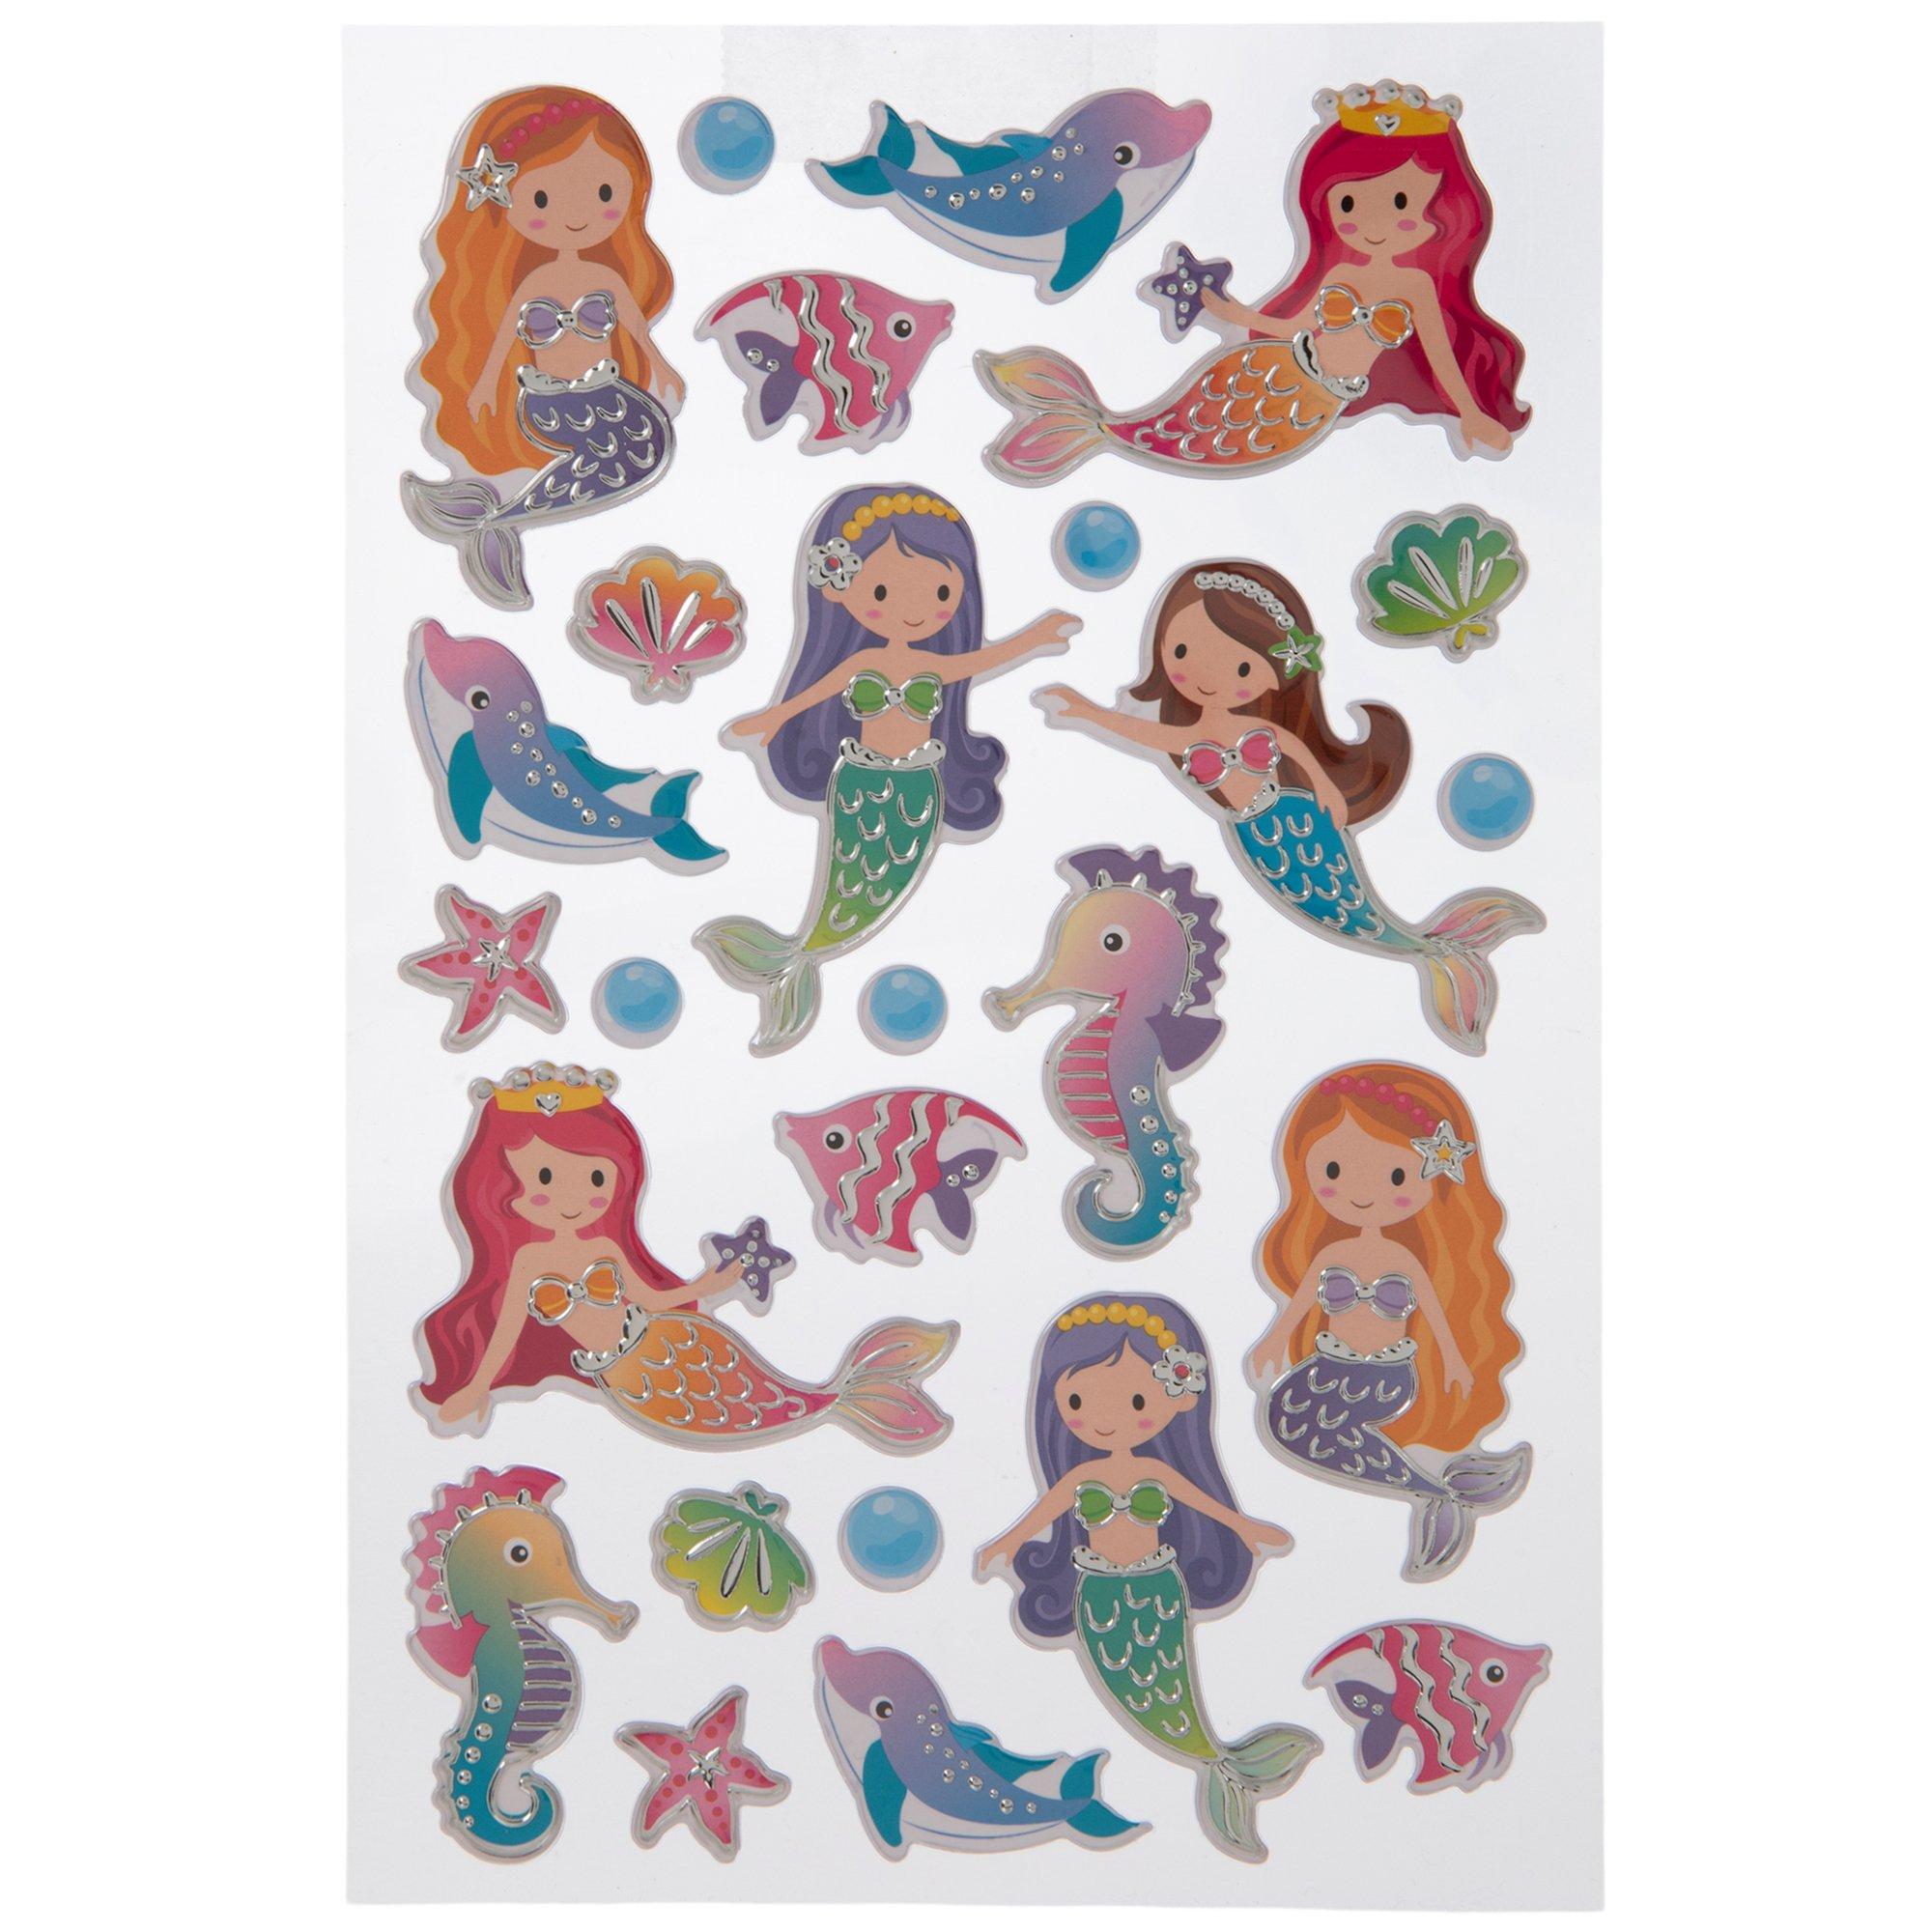 10 - 100 dolphin & mermaid themed mini small stencils for etching on glass  Ideal for Fund raising, hobby craft - 10